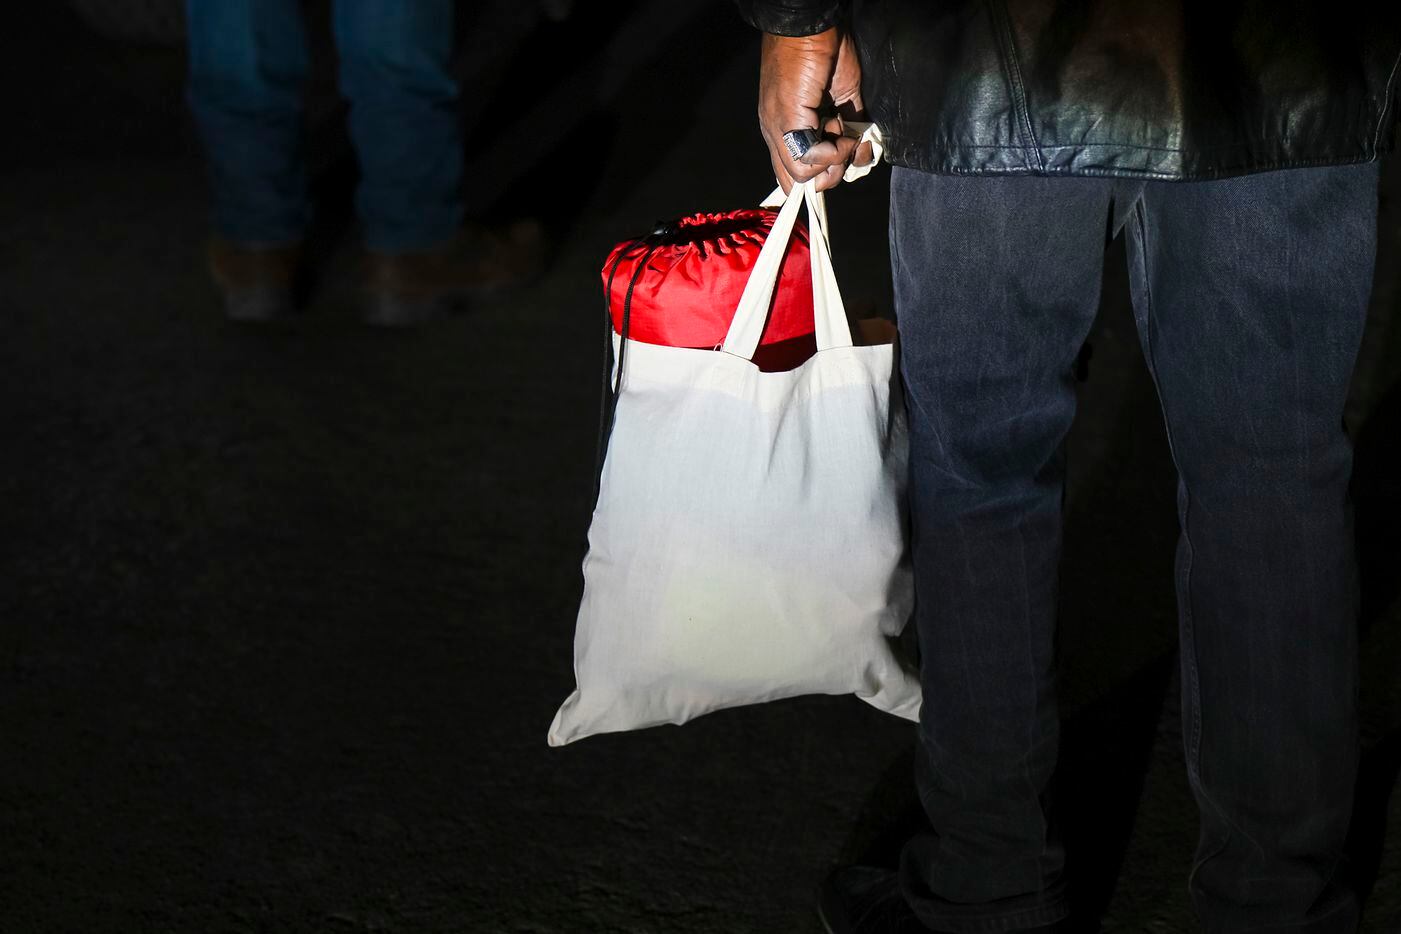 A man experiencing homelessness holds a bag with a blanket and toiletries given to him by...